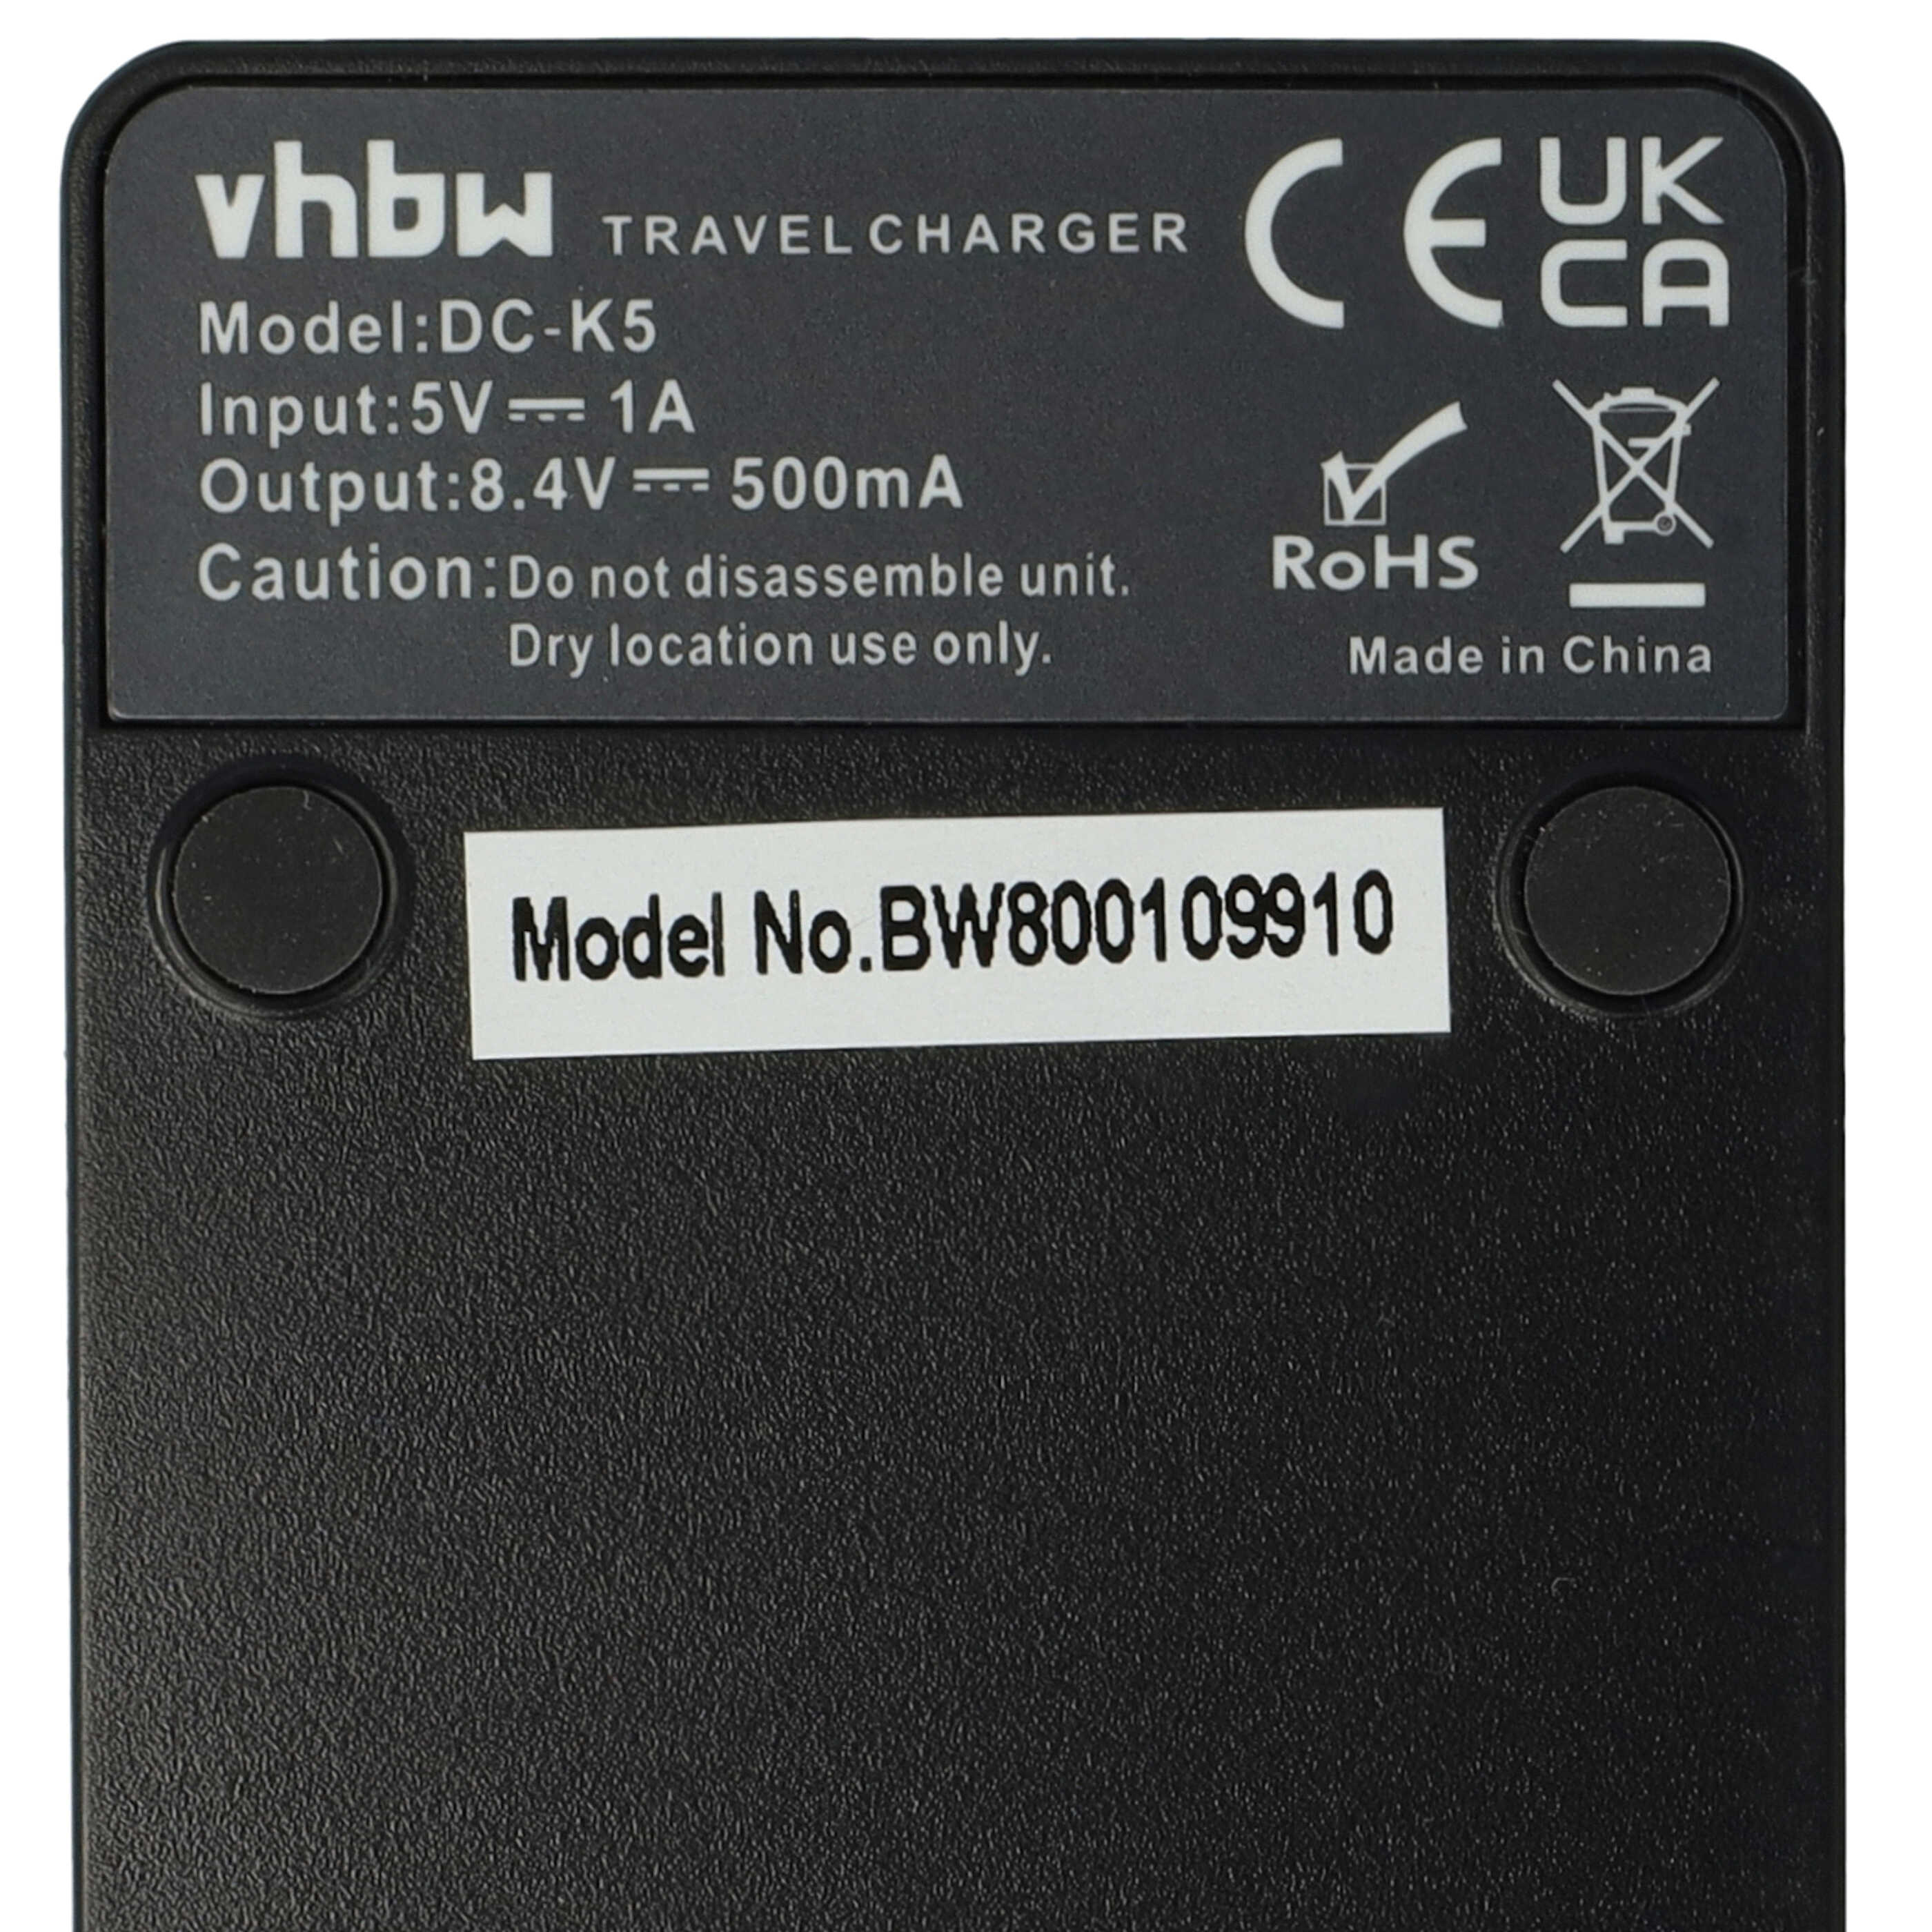 Battery Charger suitable for HDC-SD1 Camera etc. - 0.5 A, 8.4 V